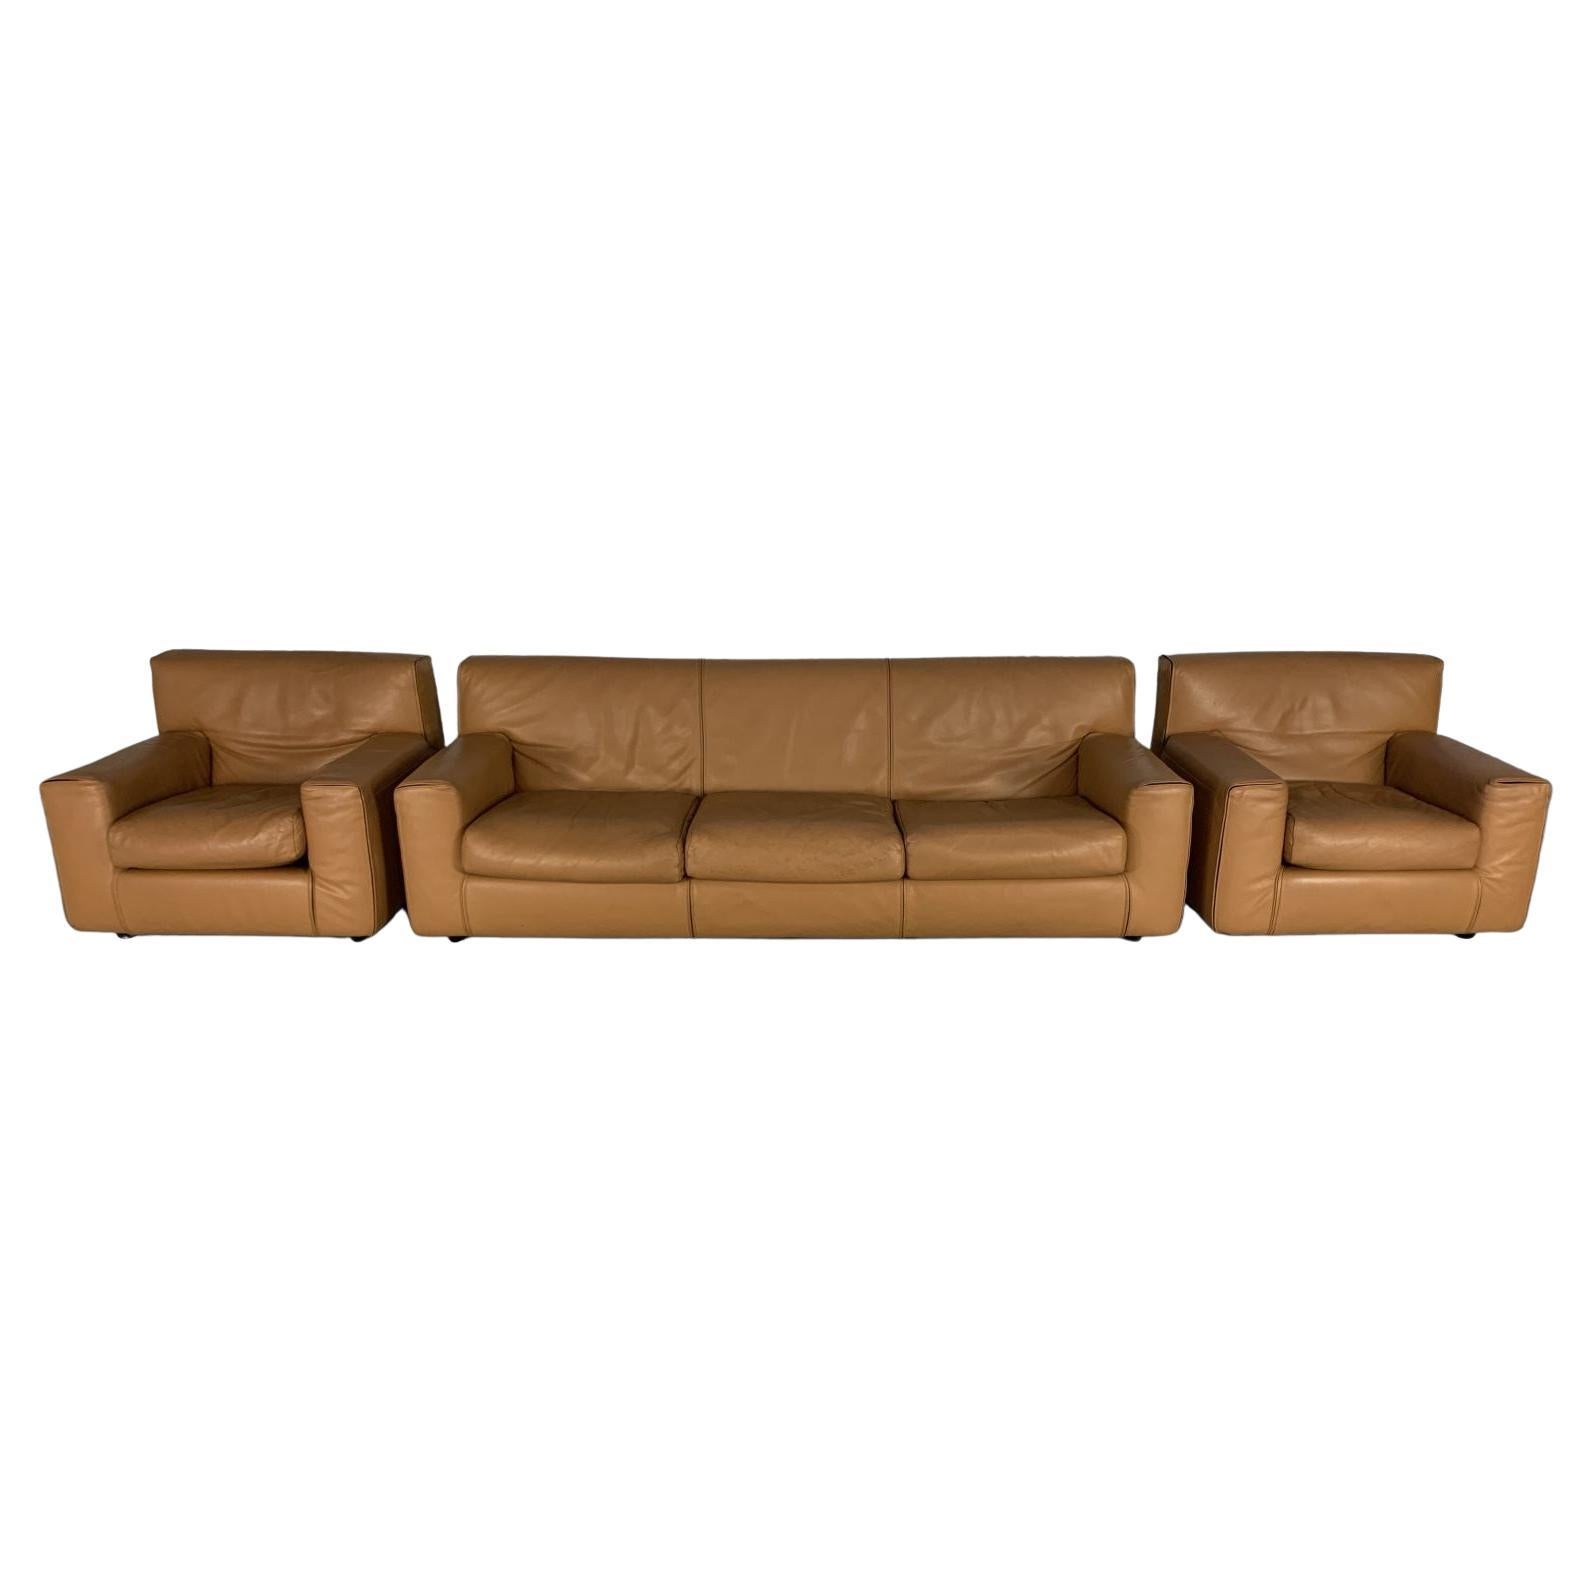 Cassina Sofa & 2 Armchair Suite, in Tan Brown Leather For Sale